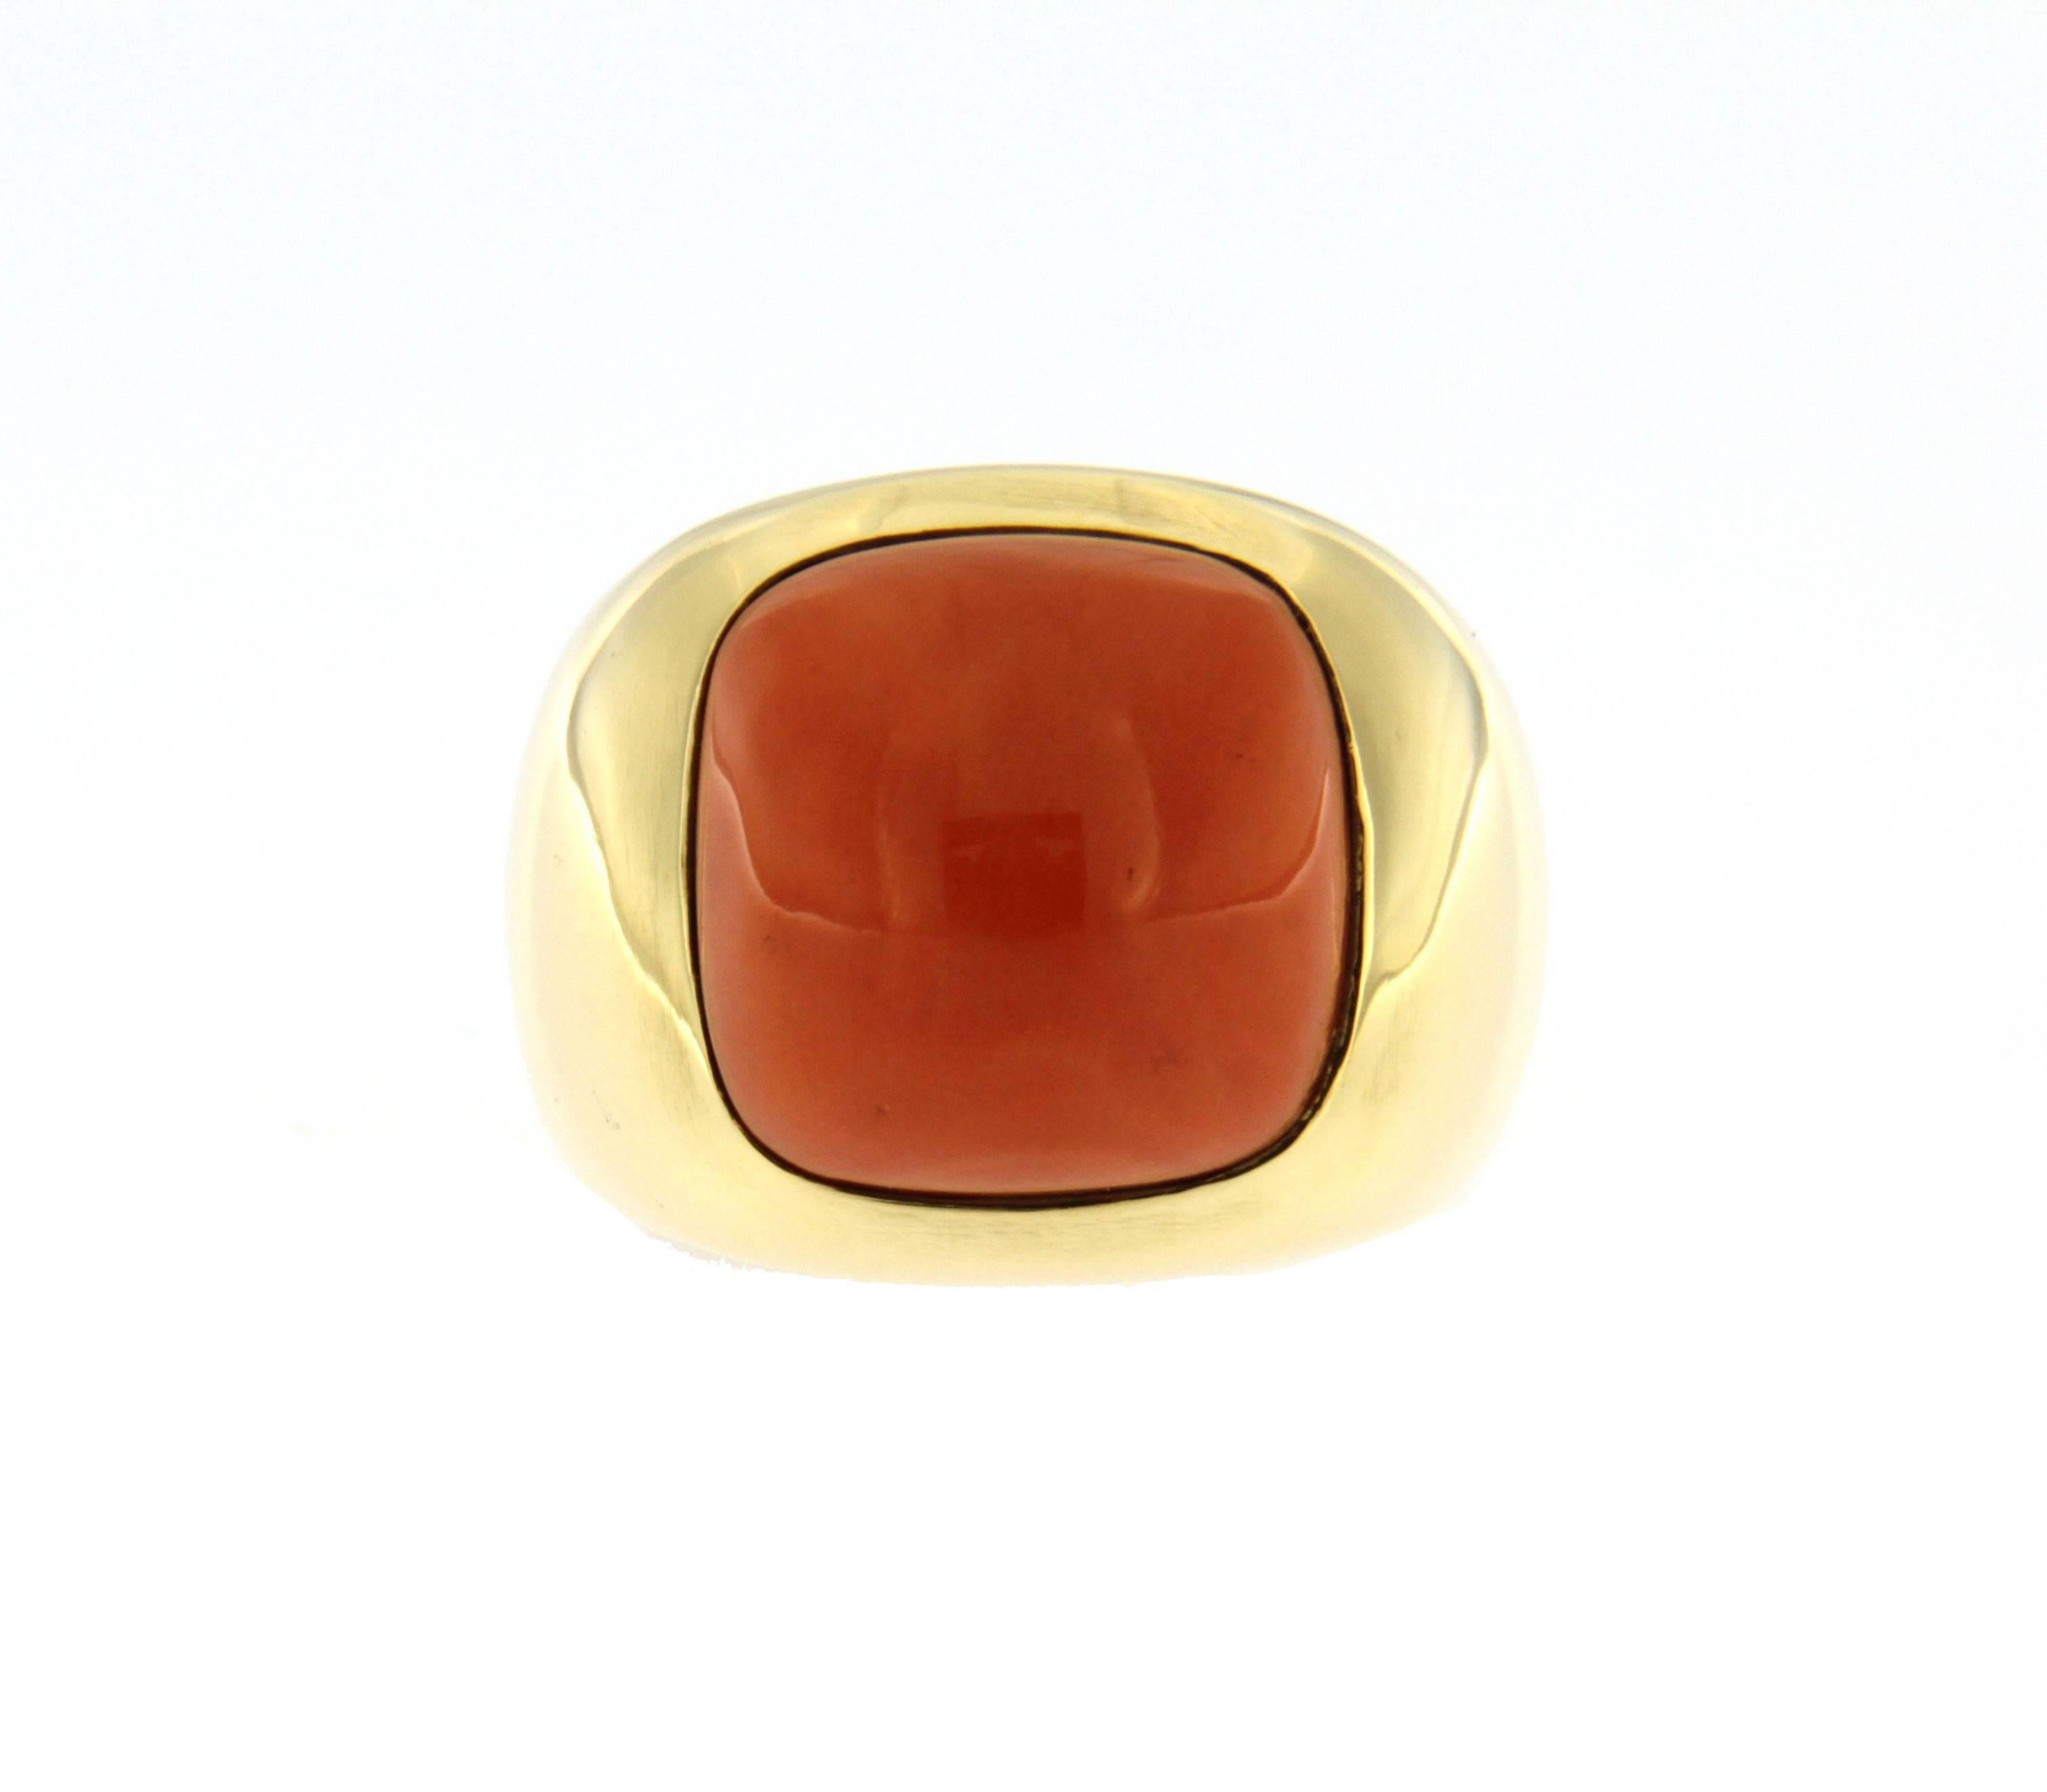 Jona design collection, 18 karat yellow gold band ring, centering a Mediterranean cabochon coral.   
Size US 6, can be sized to any specification.

All Jona jewelry is new and has never been previously owned or worn.